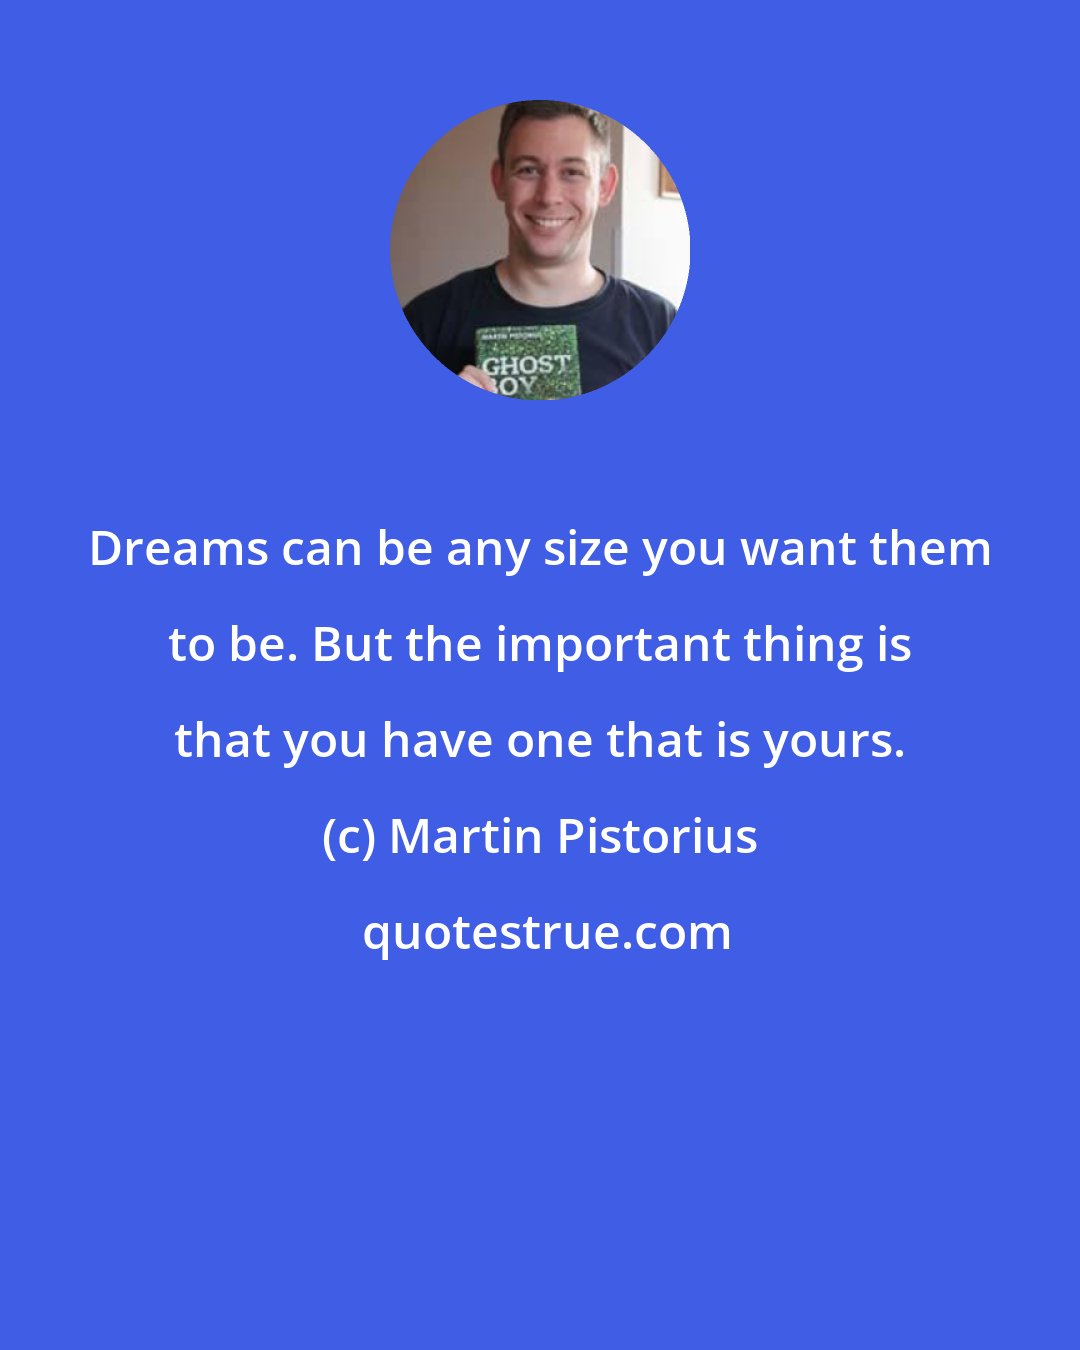 Martin Pistorius: Dreams can be any size you want them to be. But the important thing is that you have one that is yours.